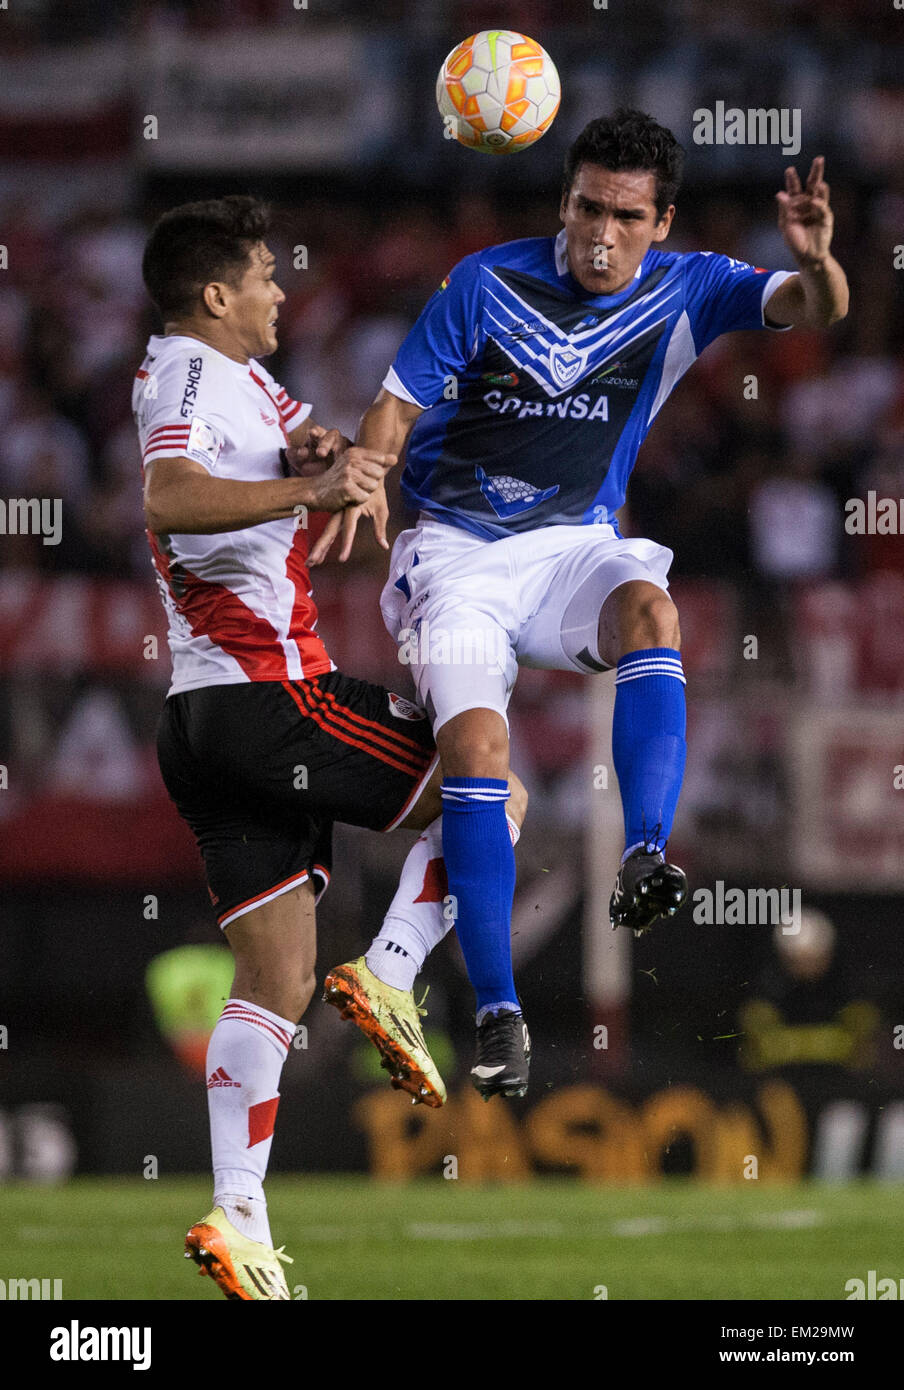 Buenos Aires, Argentina. 15th Apr, 2015. River Plate's Teofilo Gutierrez (L) of Argentina vies for the ball with San Jose's Gabriel Valverde of Bolivia during the match of Copa Libertadores in the Monumental Stadium in Buenos Aires, Argentina, April 15, 2015. River Plate won the game 3-0. © Martin Zabala/Xinhua/Alamy Live News Stock Photo